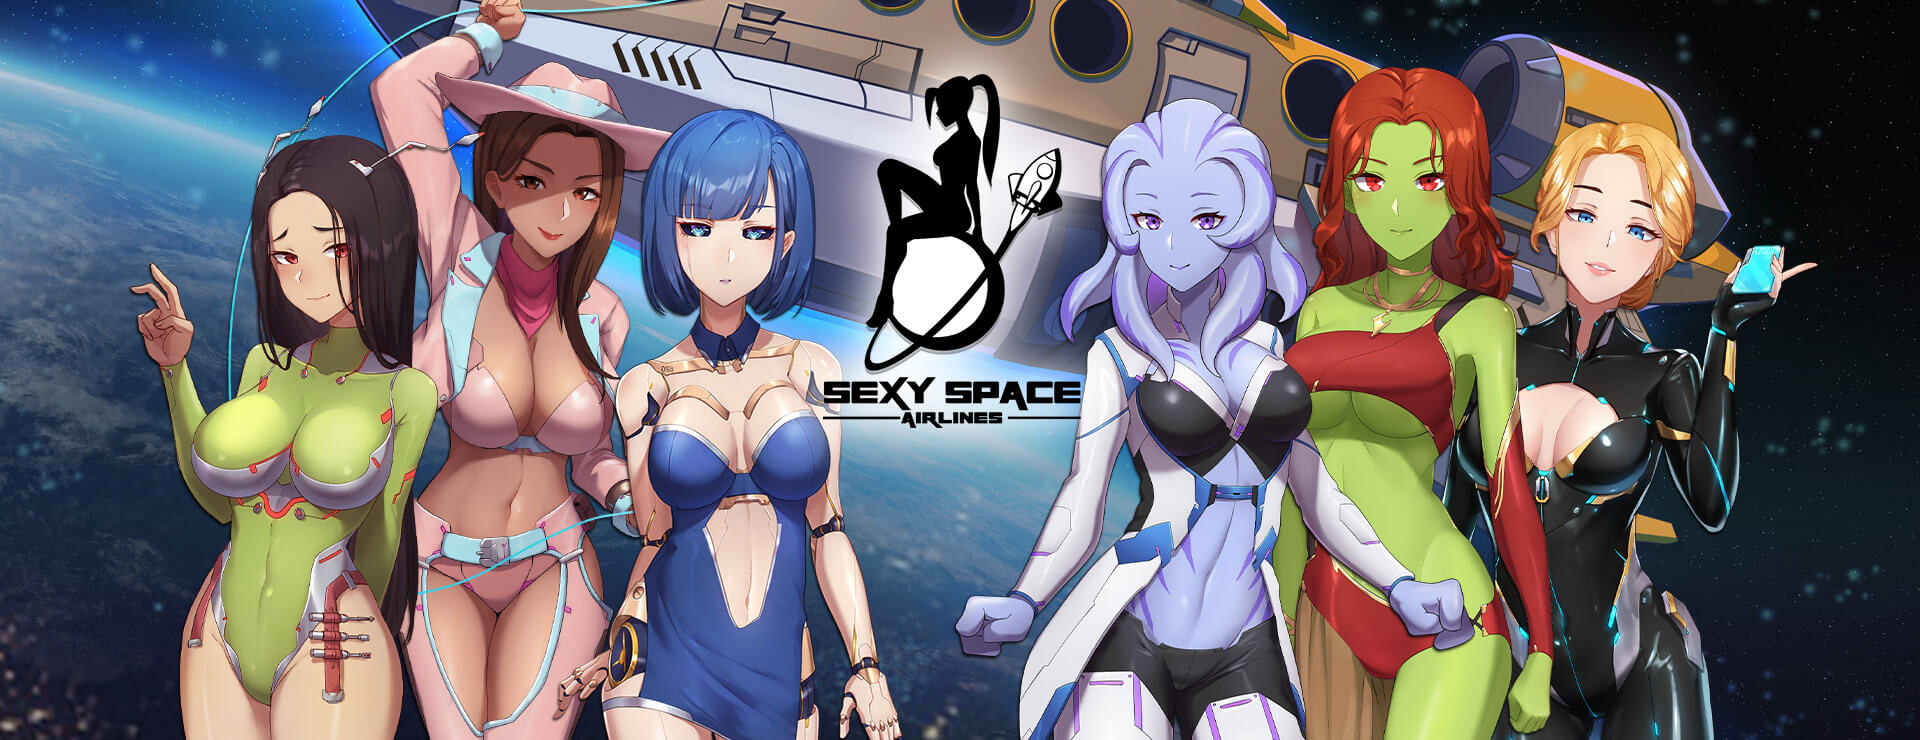 Sexy Space Airlines - Casual Game